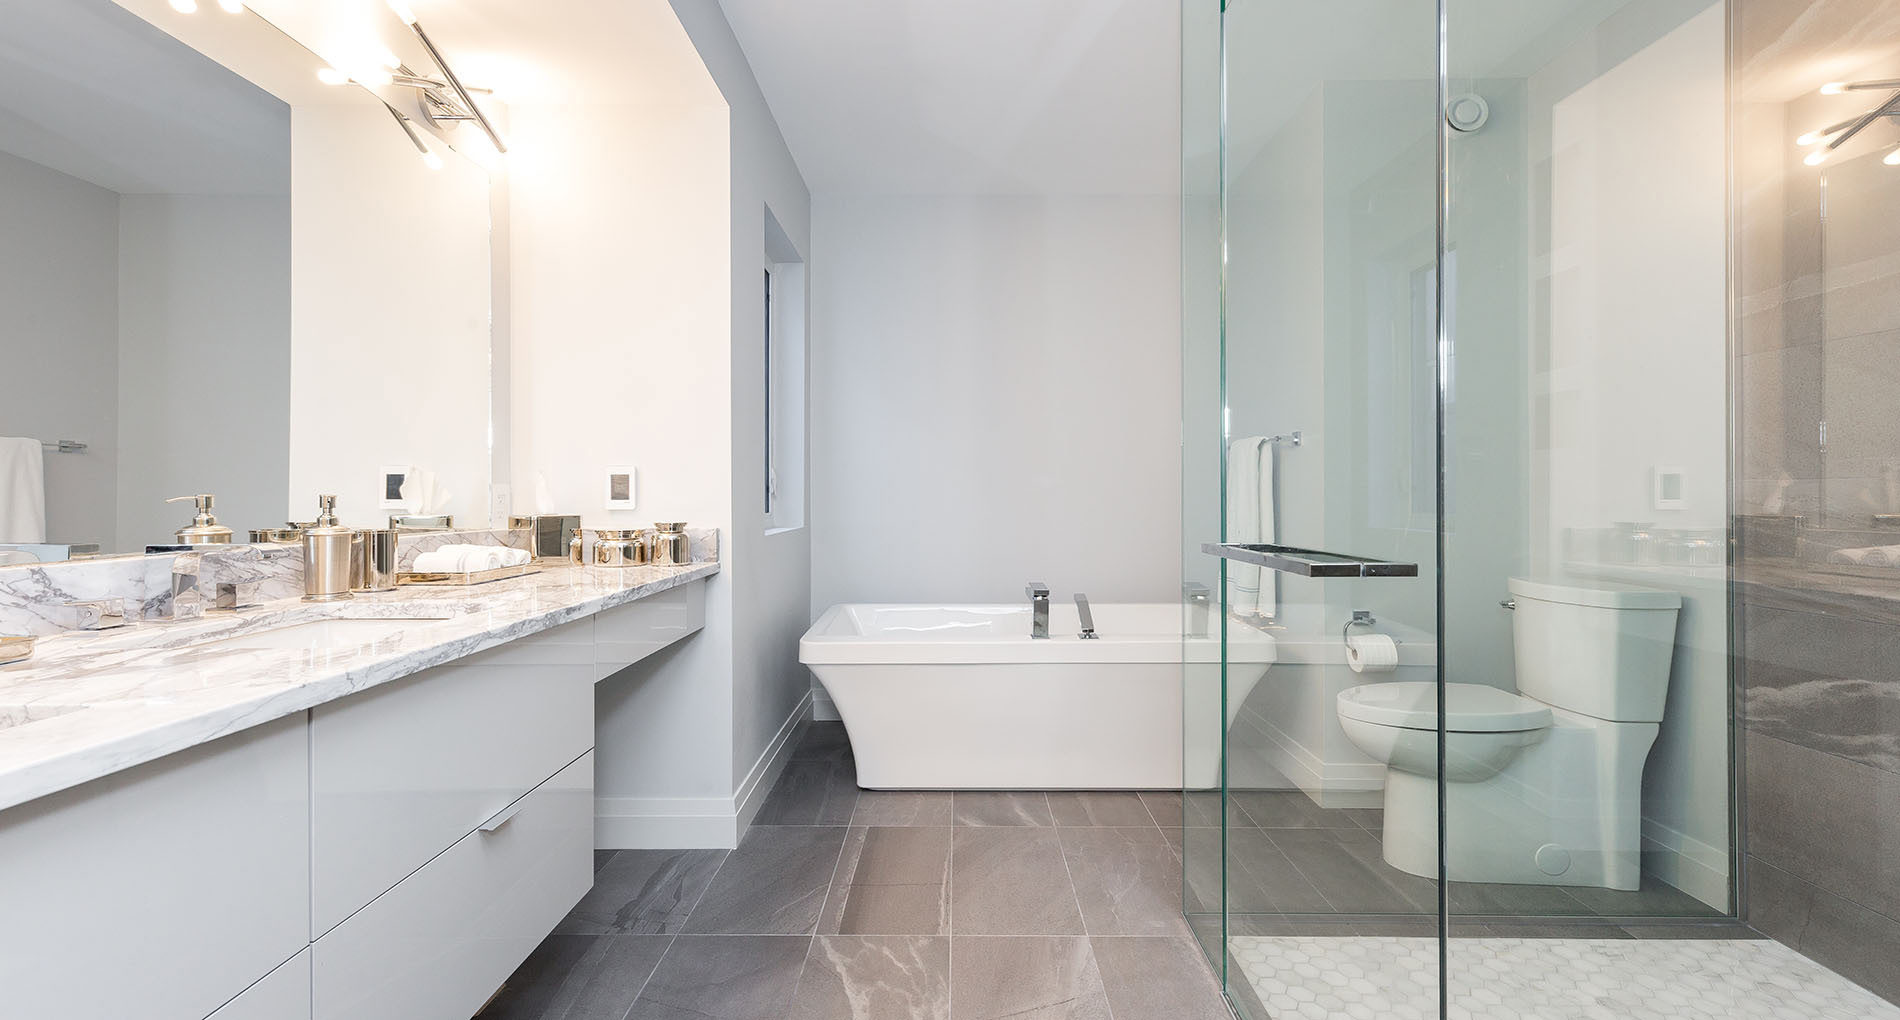 The Newest 2020 Trends for Your Bathroom Renovation